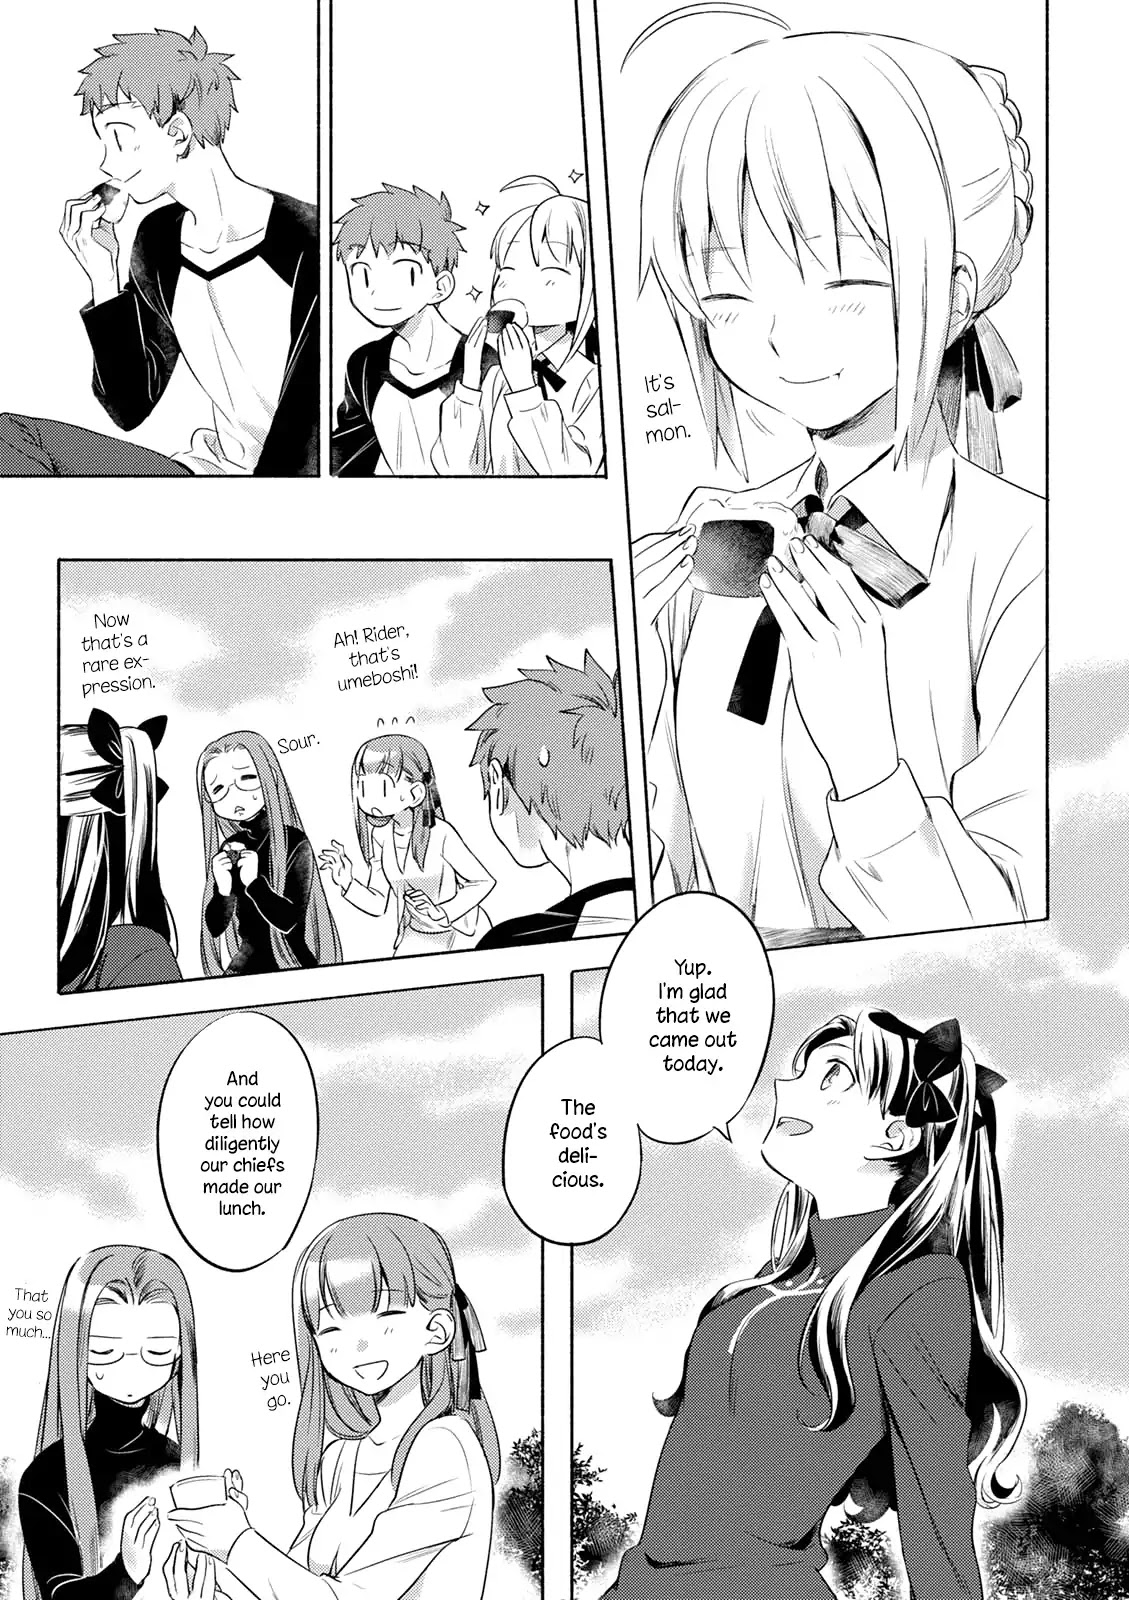 What's Cooking at the Emiya House Today? Chapter 9.1